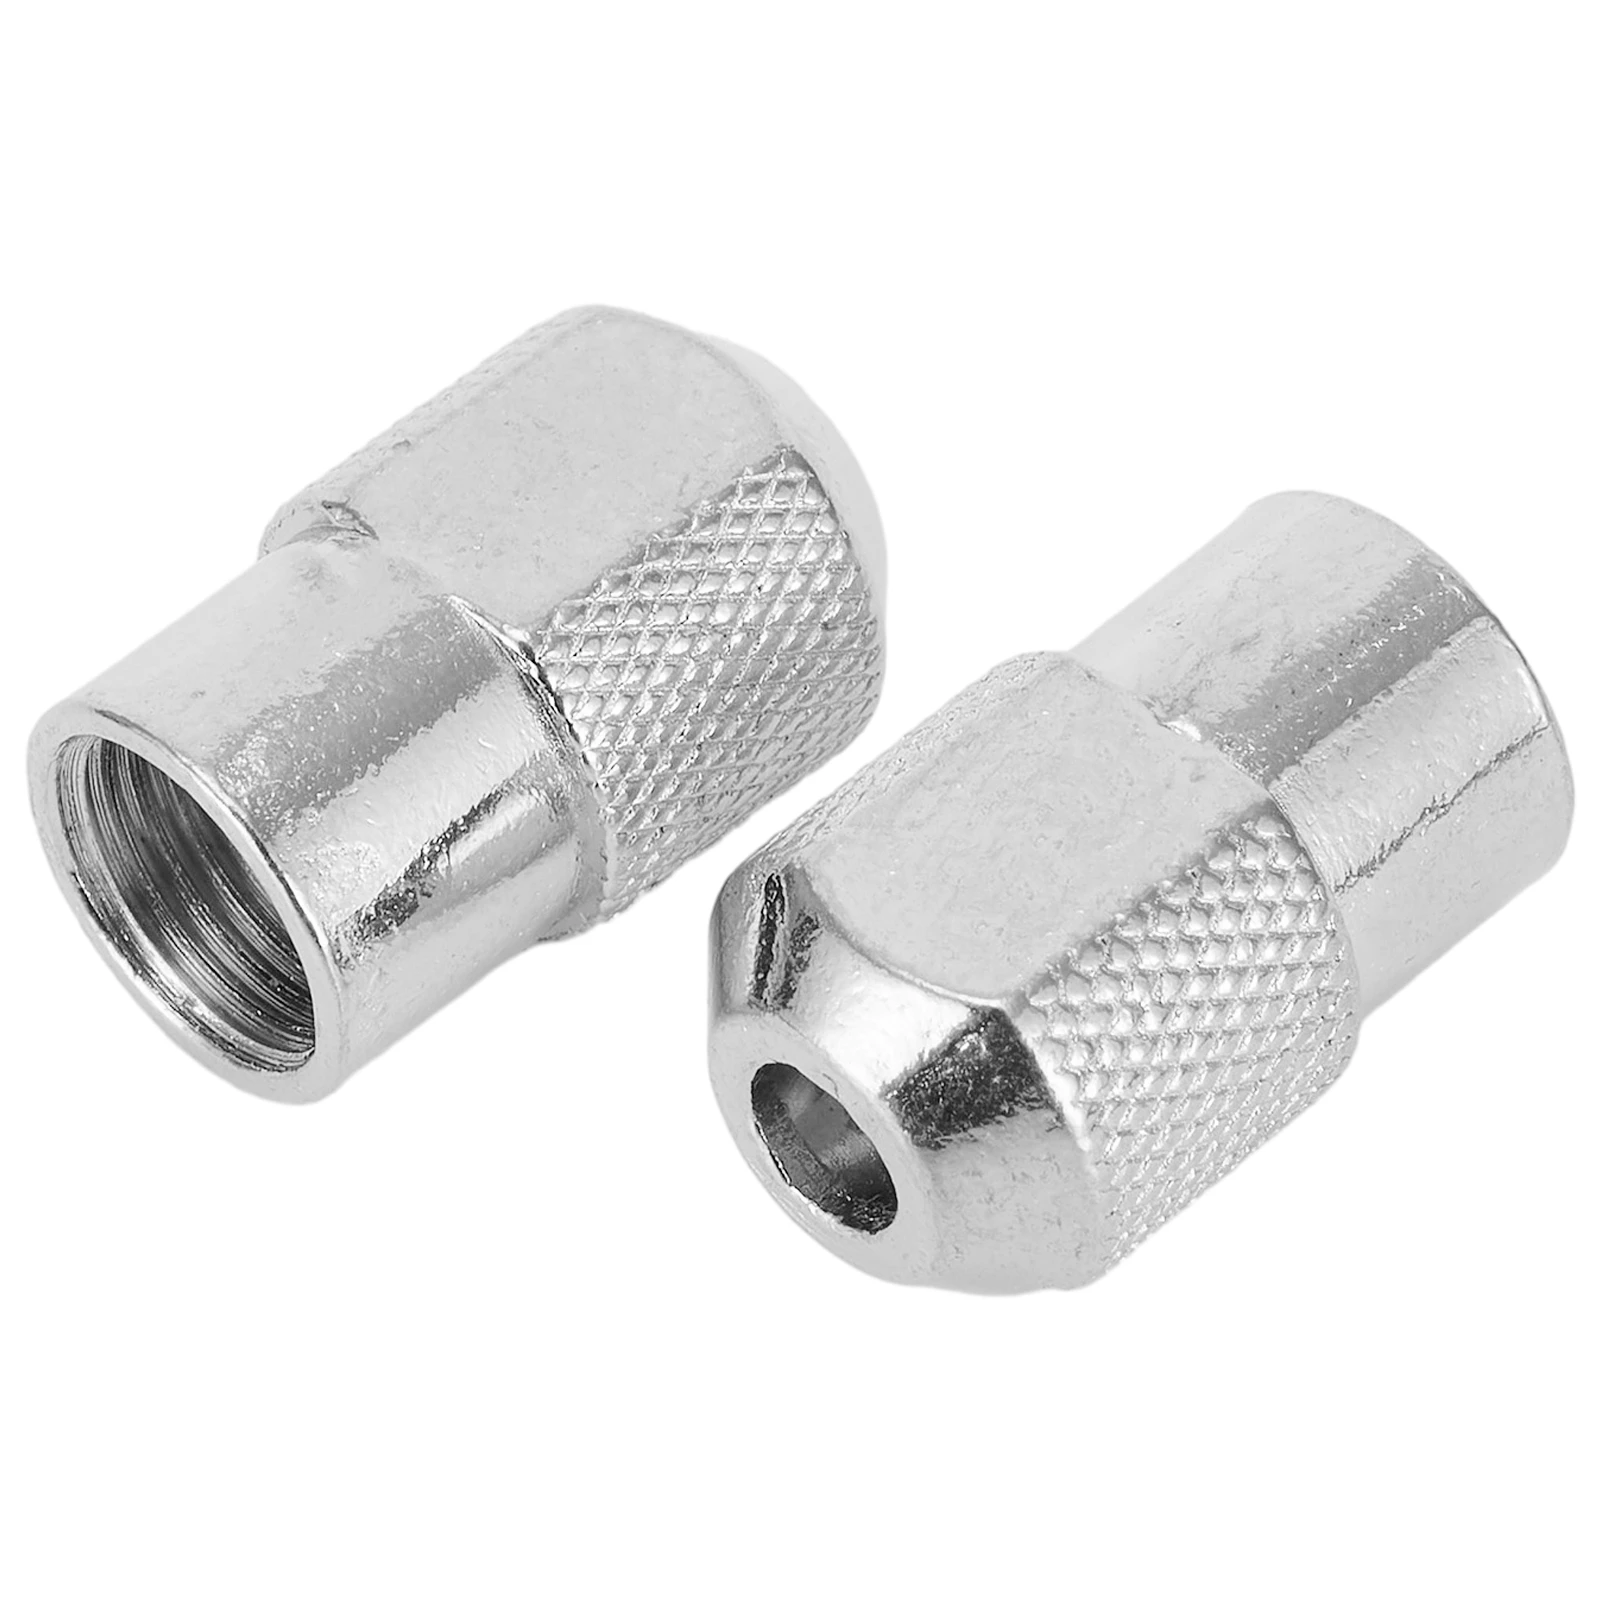 5pcs M8X0.75mm Drill Chuck Electric Mill Shaft Screw Cap Nut Collet For Electric Mill Grinder Shaft Rotary Tool Power Tools Acce 6pcs mini drill chuck m8 0 75mm zinc alloy chuck nut rotary tool for electric grinder power tools accessories